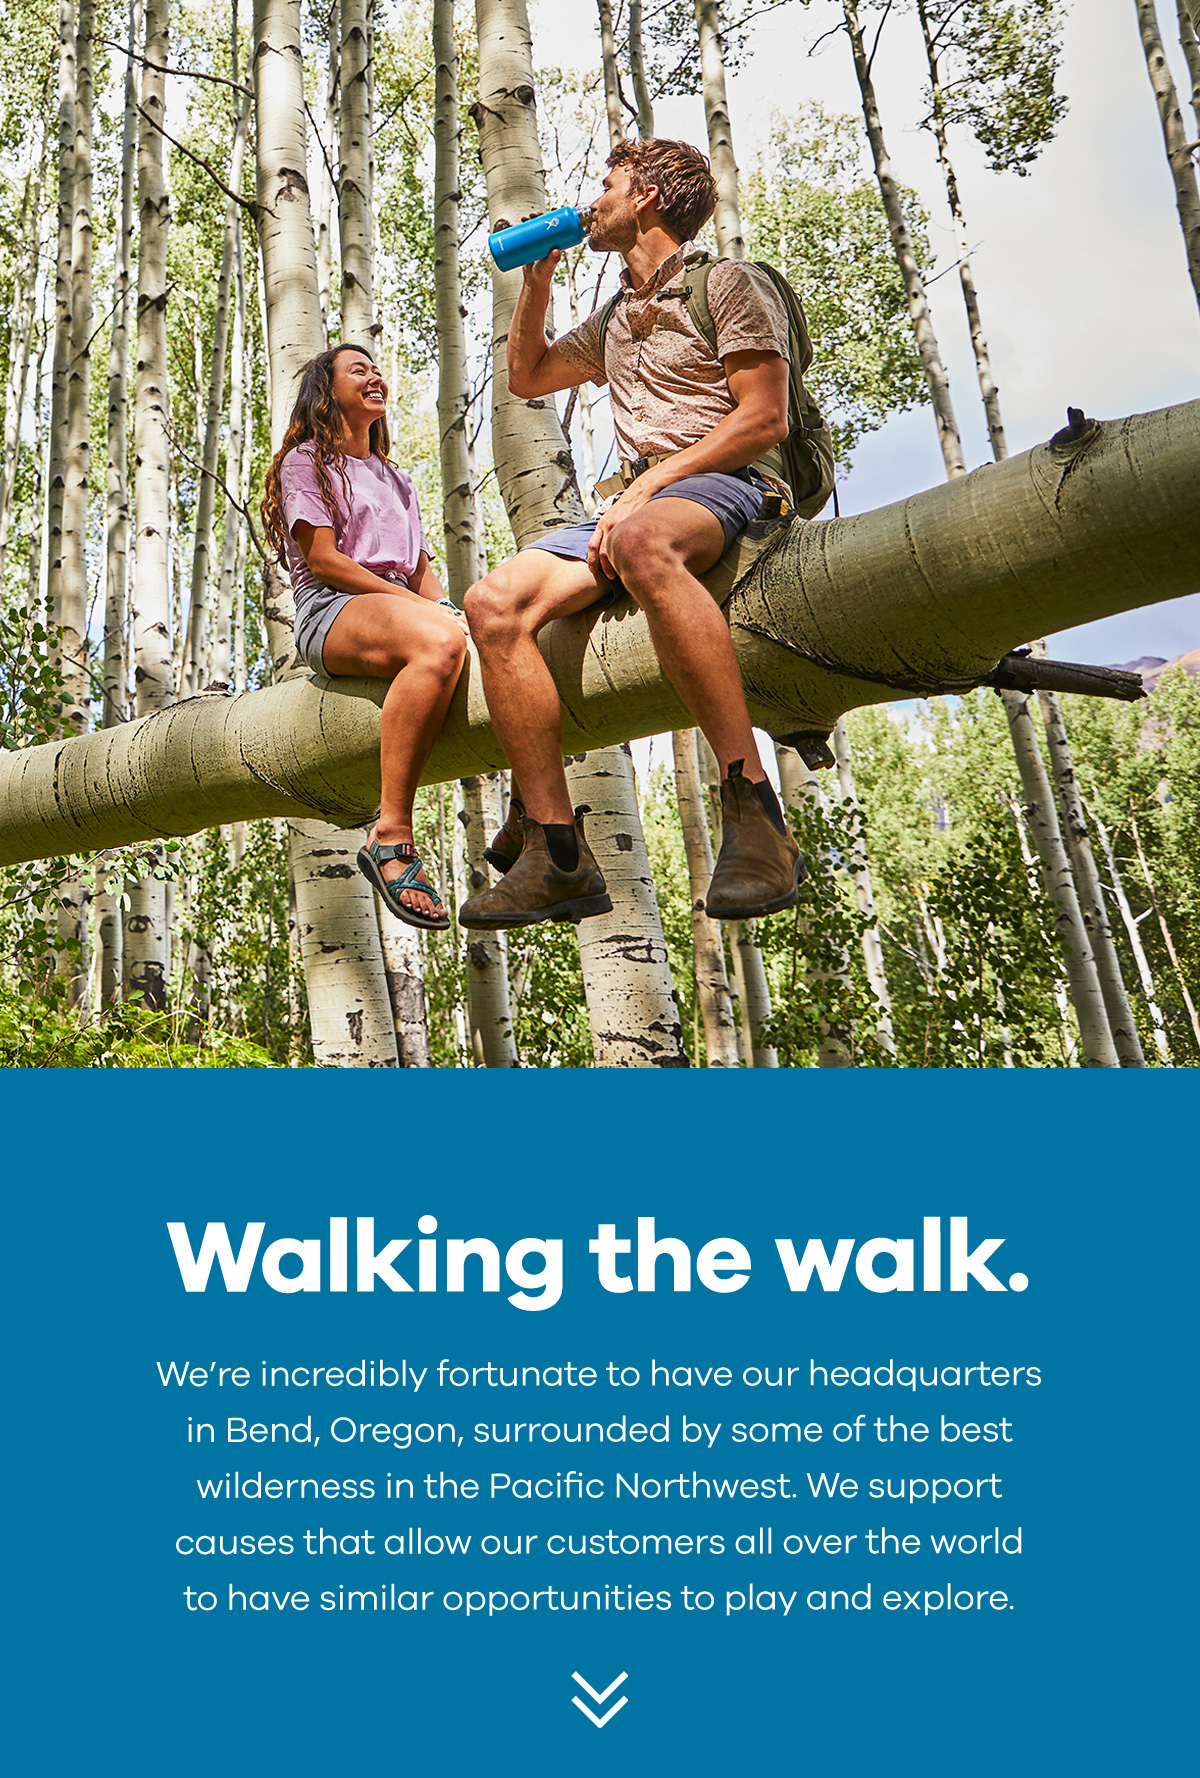 Walking the walk. We''re incredibly fortunate to have our headquarters in Bend, Oregon, surrounded by some of the best wilderness in the Pacific Northwest. We support causes that allow our customers all over the world to have similar opportunities to play and explore.